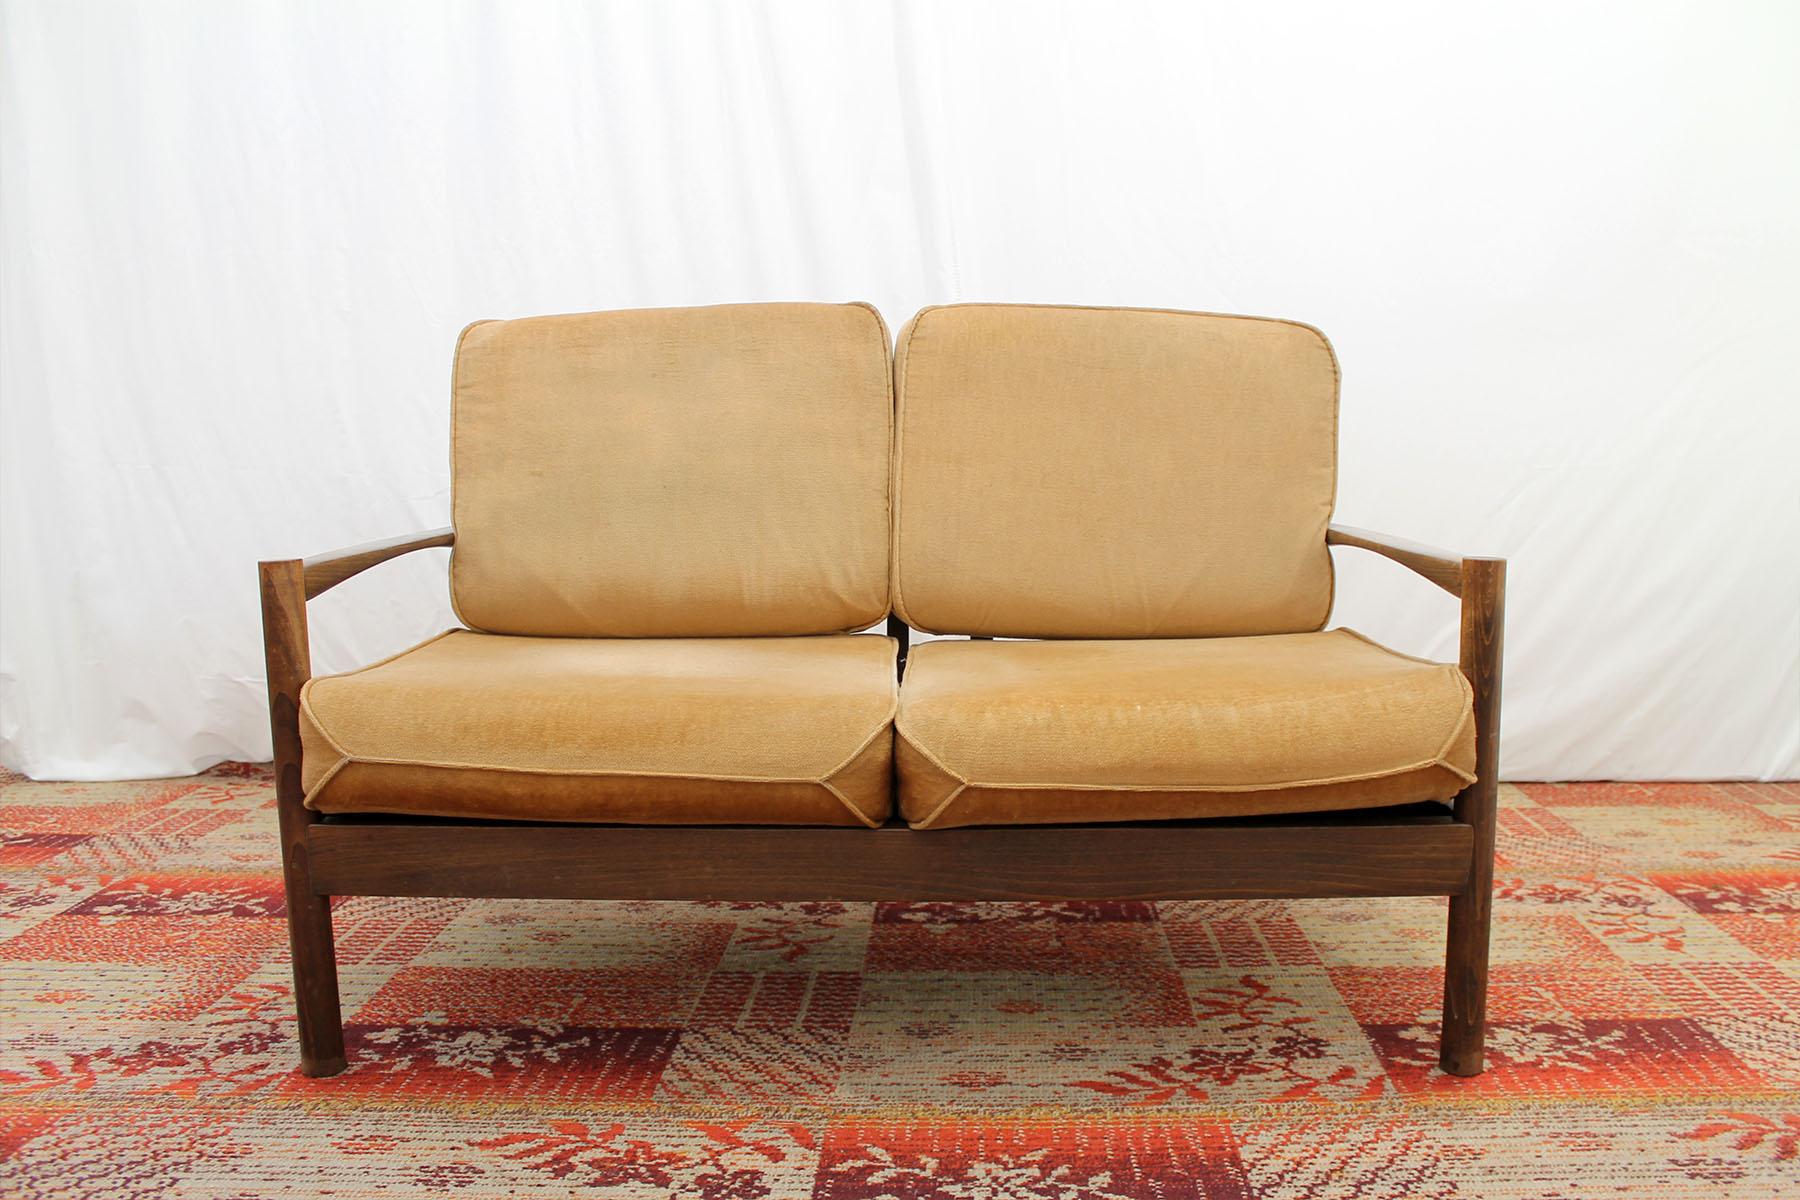 TThis two seater Scandinavian style sofa was made in the 1980s. It´s upholstered in fabric. The structure is made of beechwood. In good Vintage condition, showing signs of age and using.



Height: 76 cm
Width: 116 cm
Depth: 77 cm
Seat